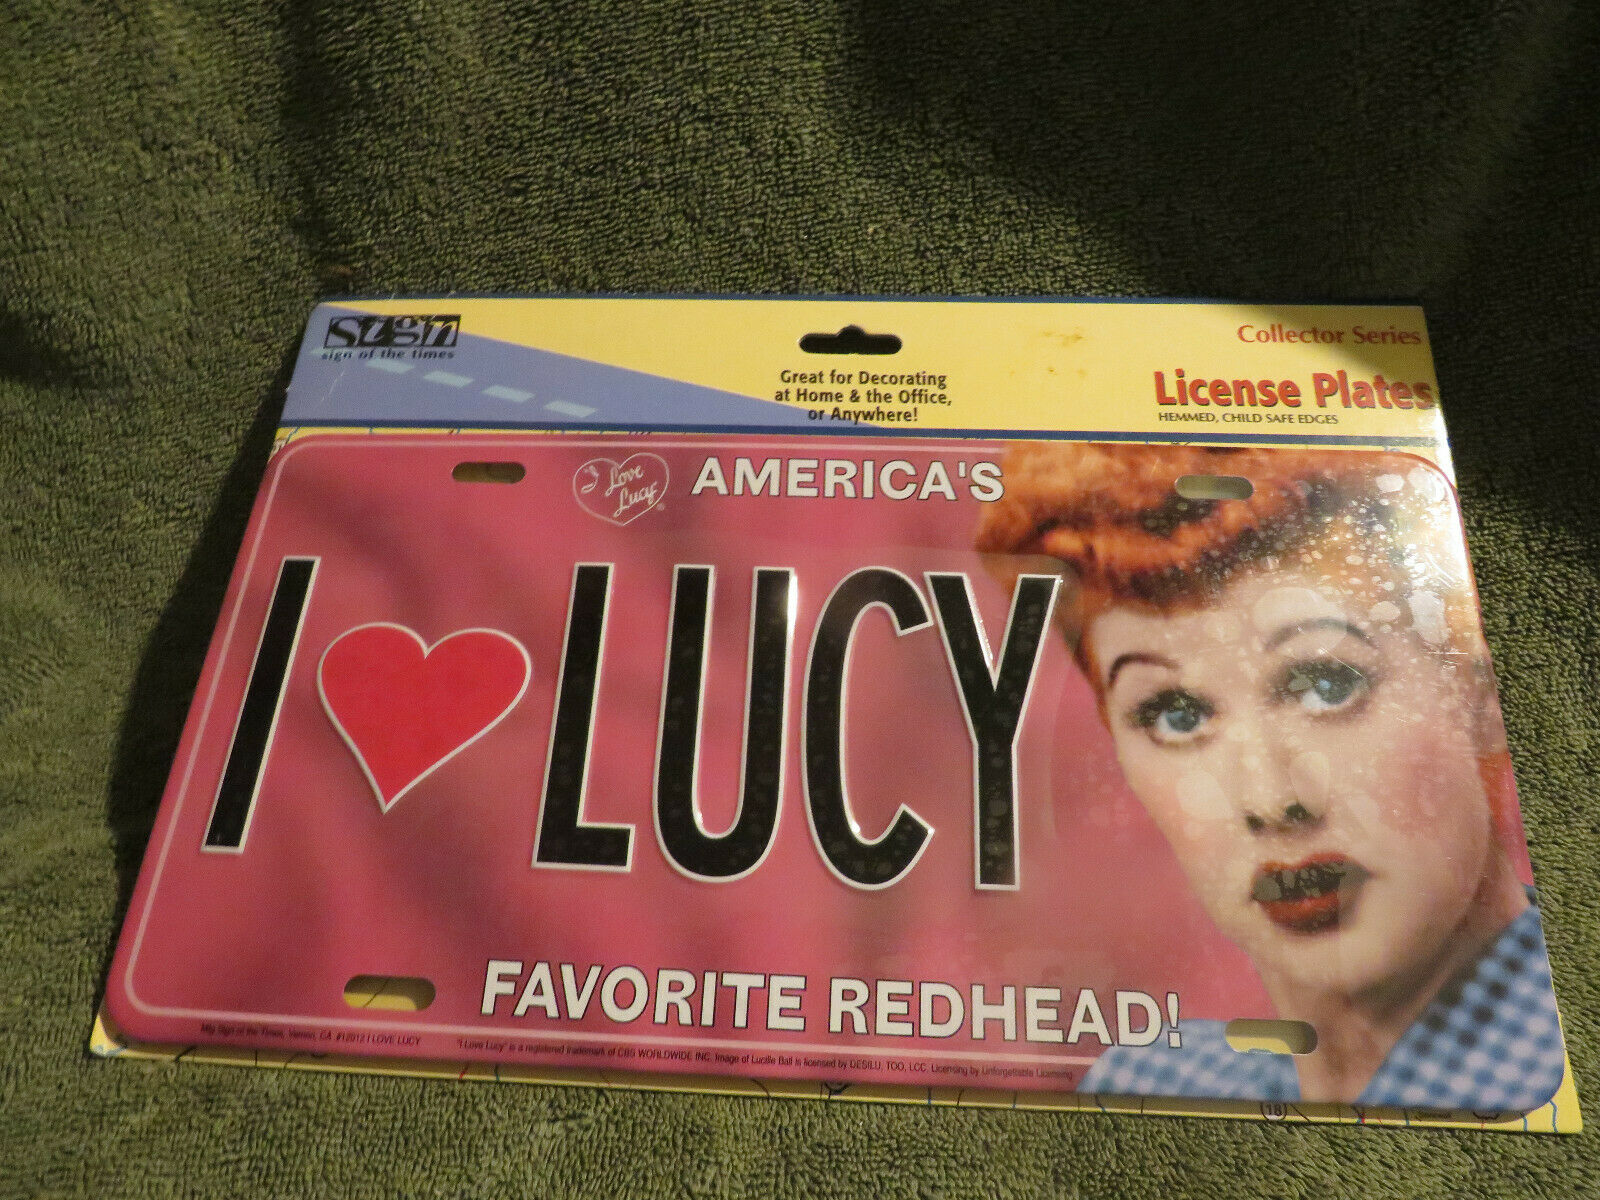 Collector Series License Plate~"i Love Lucy" America's Favorite Redhead